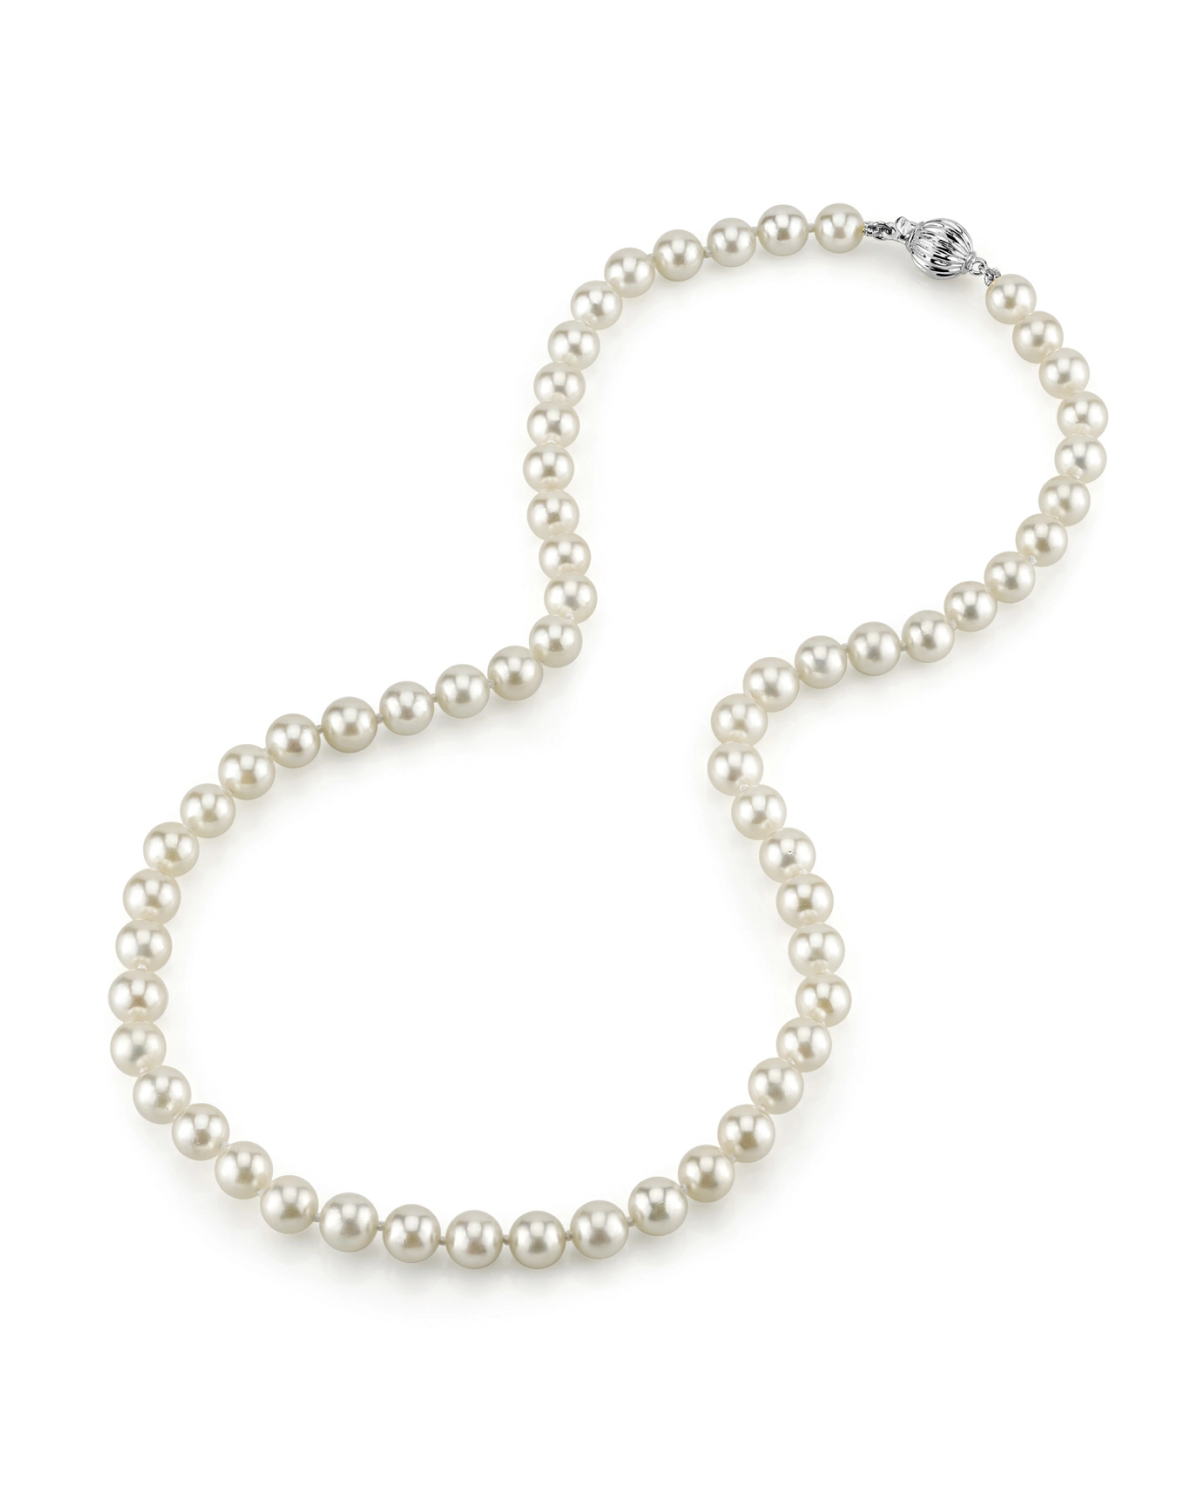 6.5-7.0mm Japanese Akoya White Pearl Necklace- AAA Quality